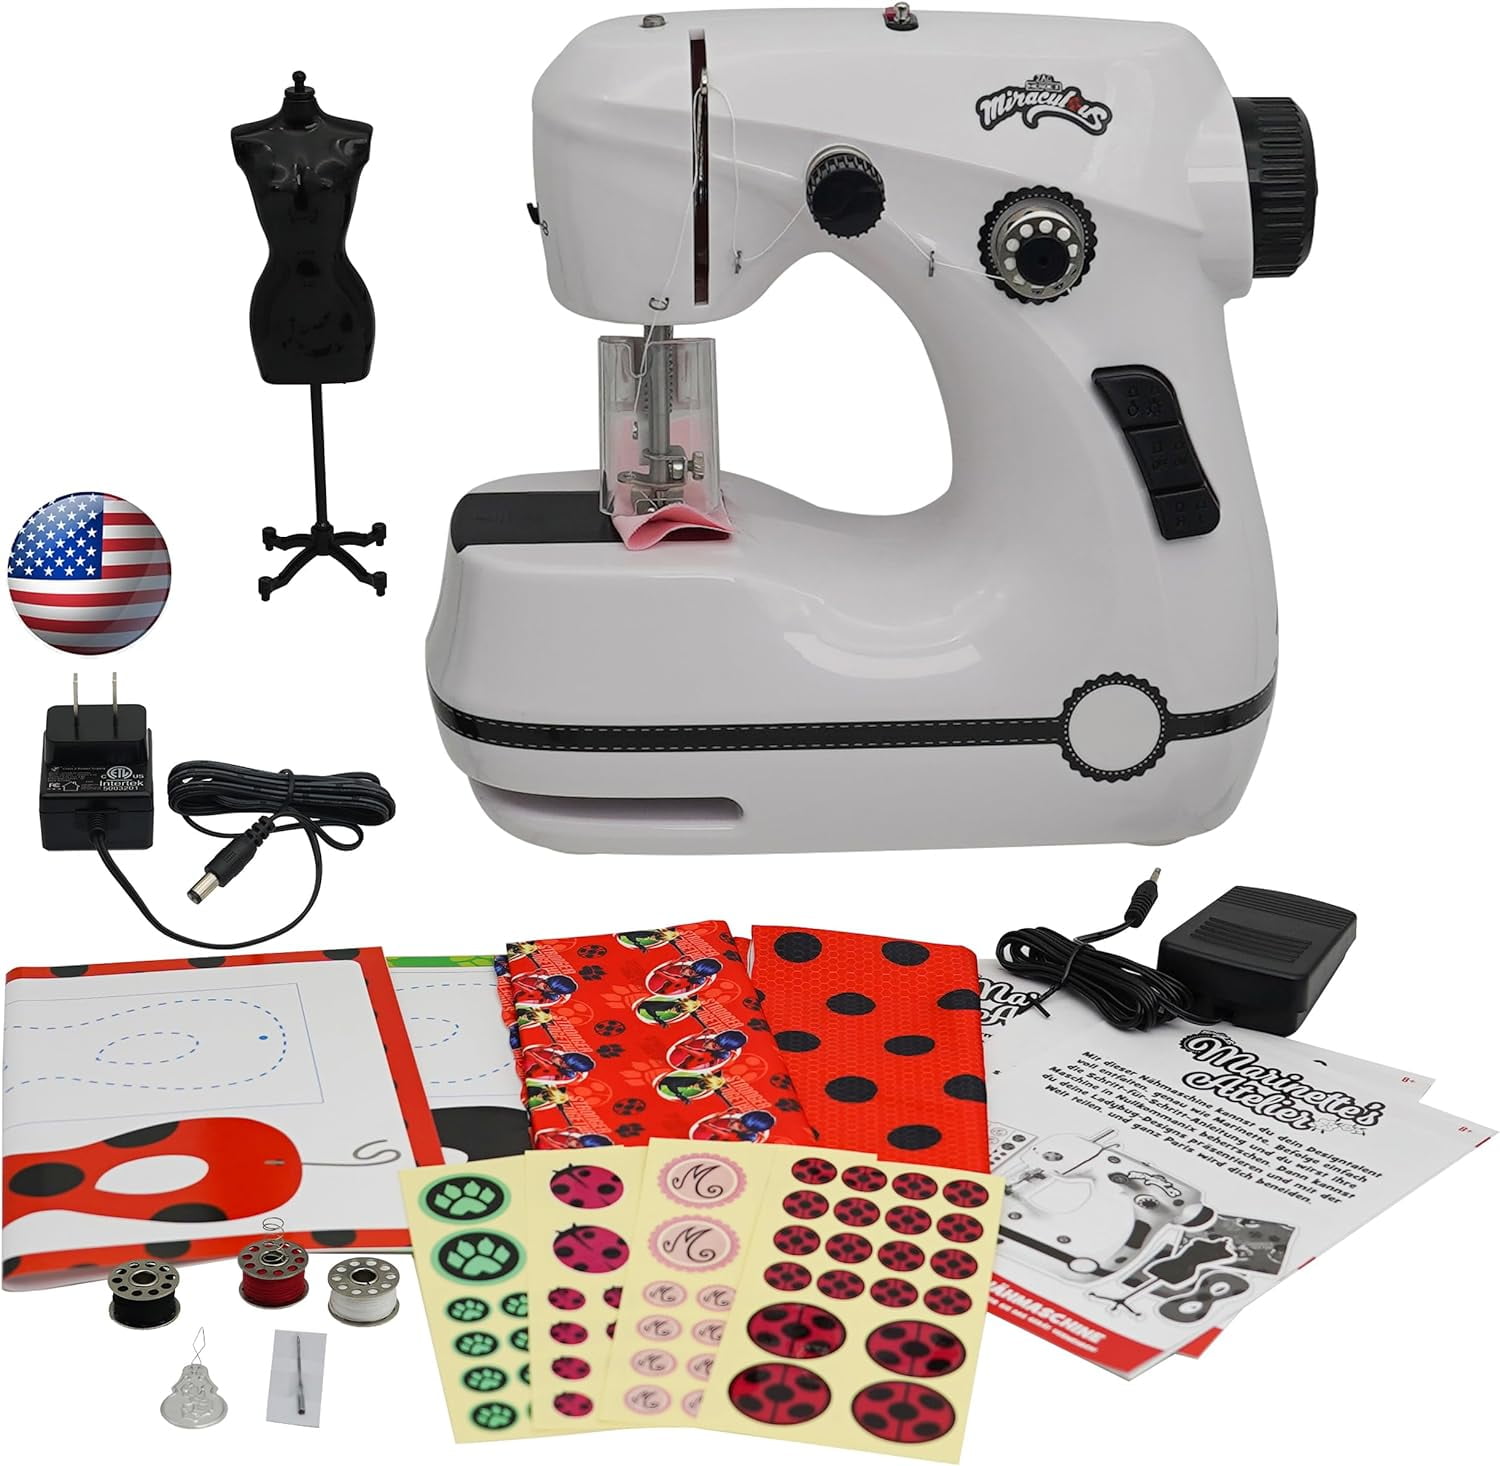 How does Sew Cool Work? Sew Cool No Thread Kids Sewing Machine Review